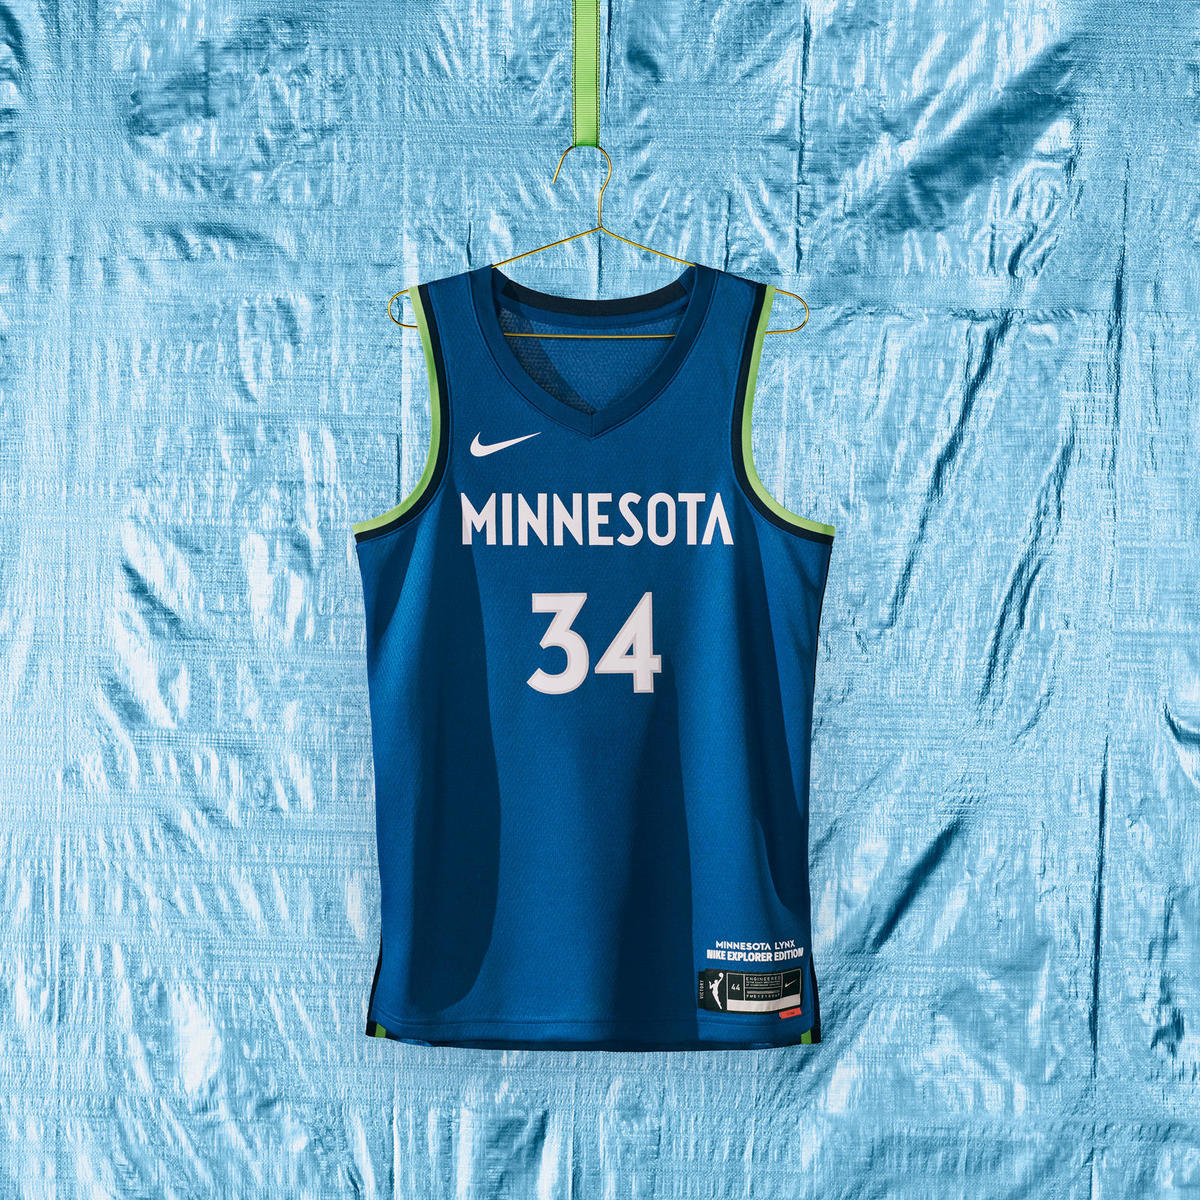 “One Size Doesn’t Fit At All”: Introducing Nike X WNBA Uniform Apparel